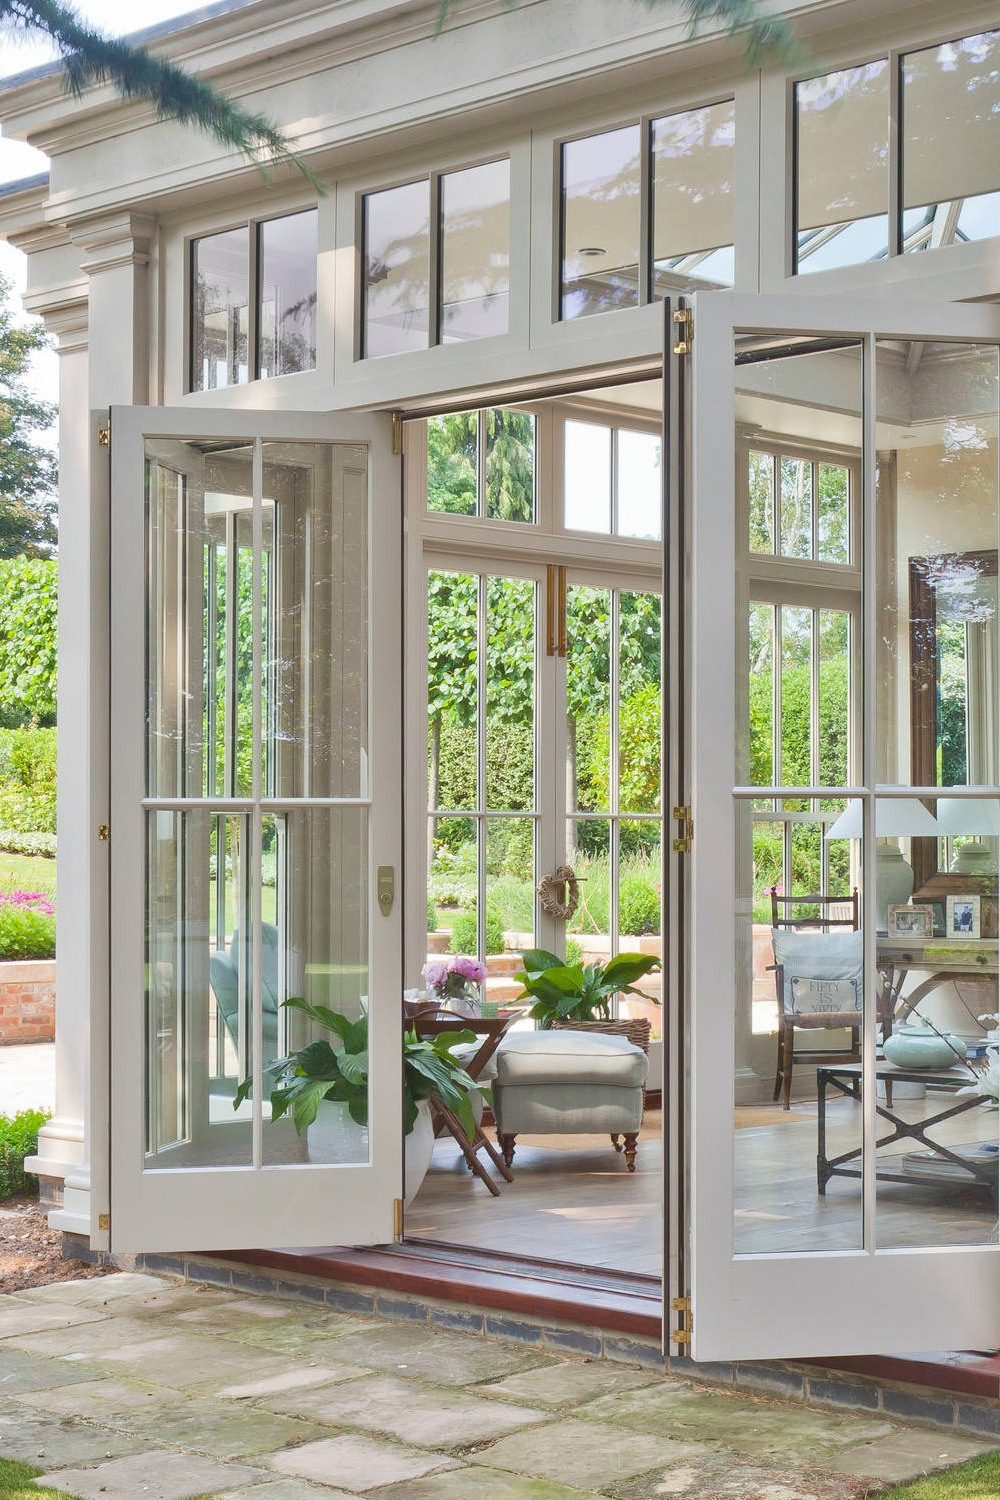 Contemporary Patio Doors: The Latest
Designs for Stylish Outdoor Spaces